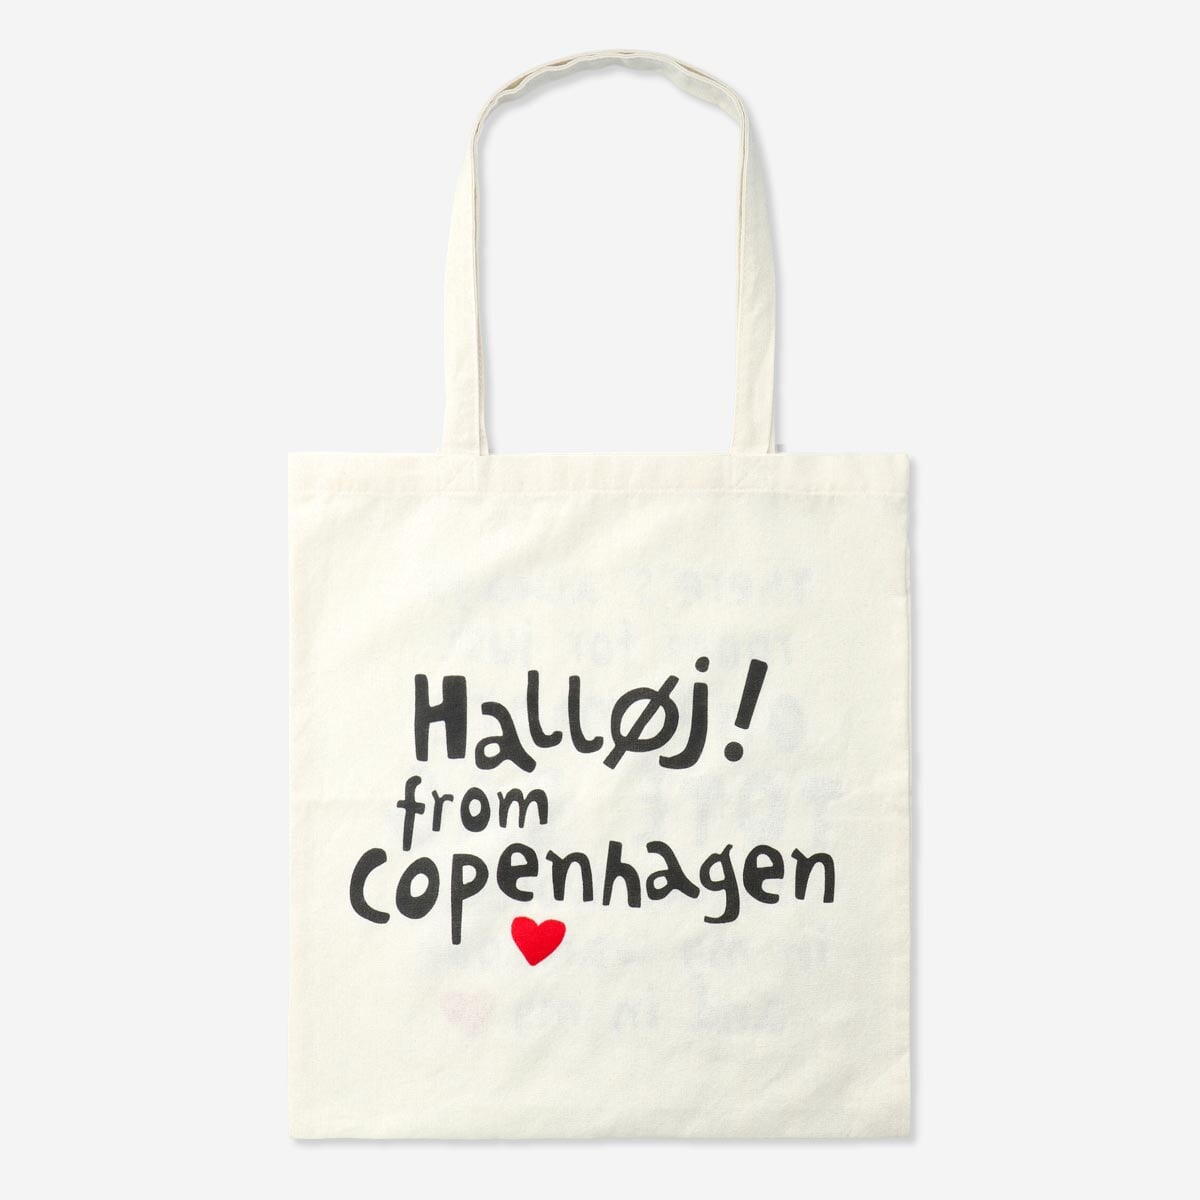 Flying Tiger Copenhagen Hashtag Tote Bag 12 x 16 Inches